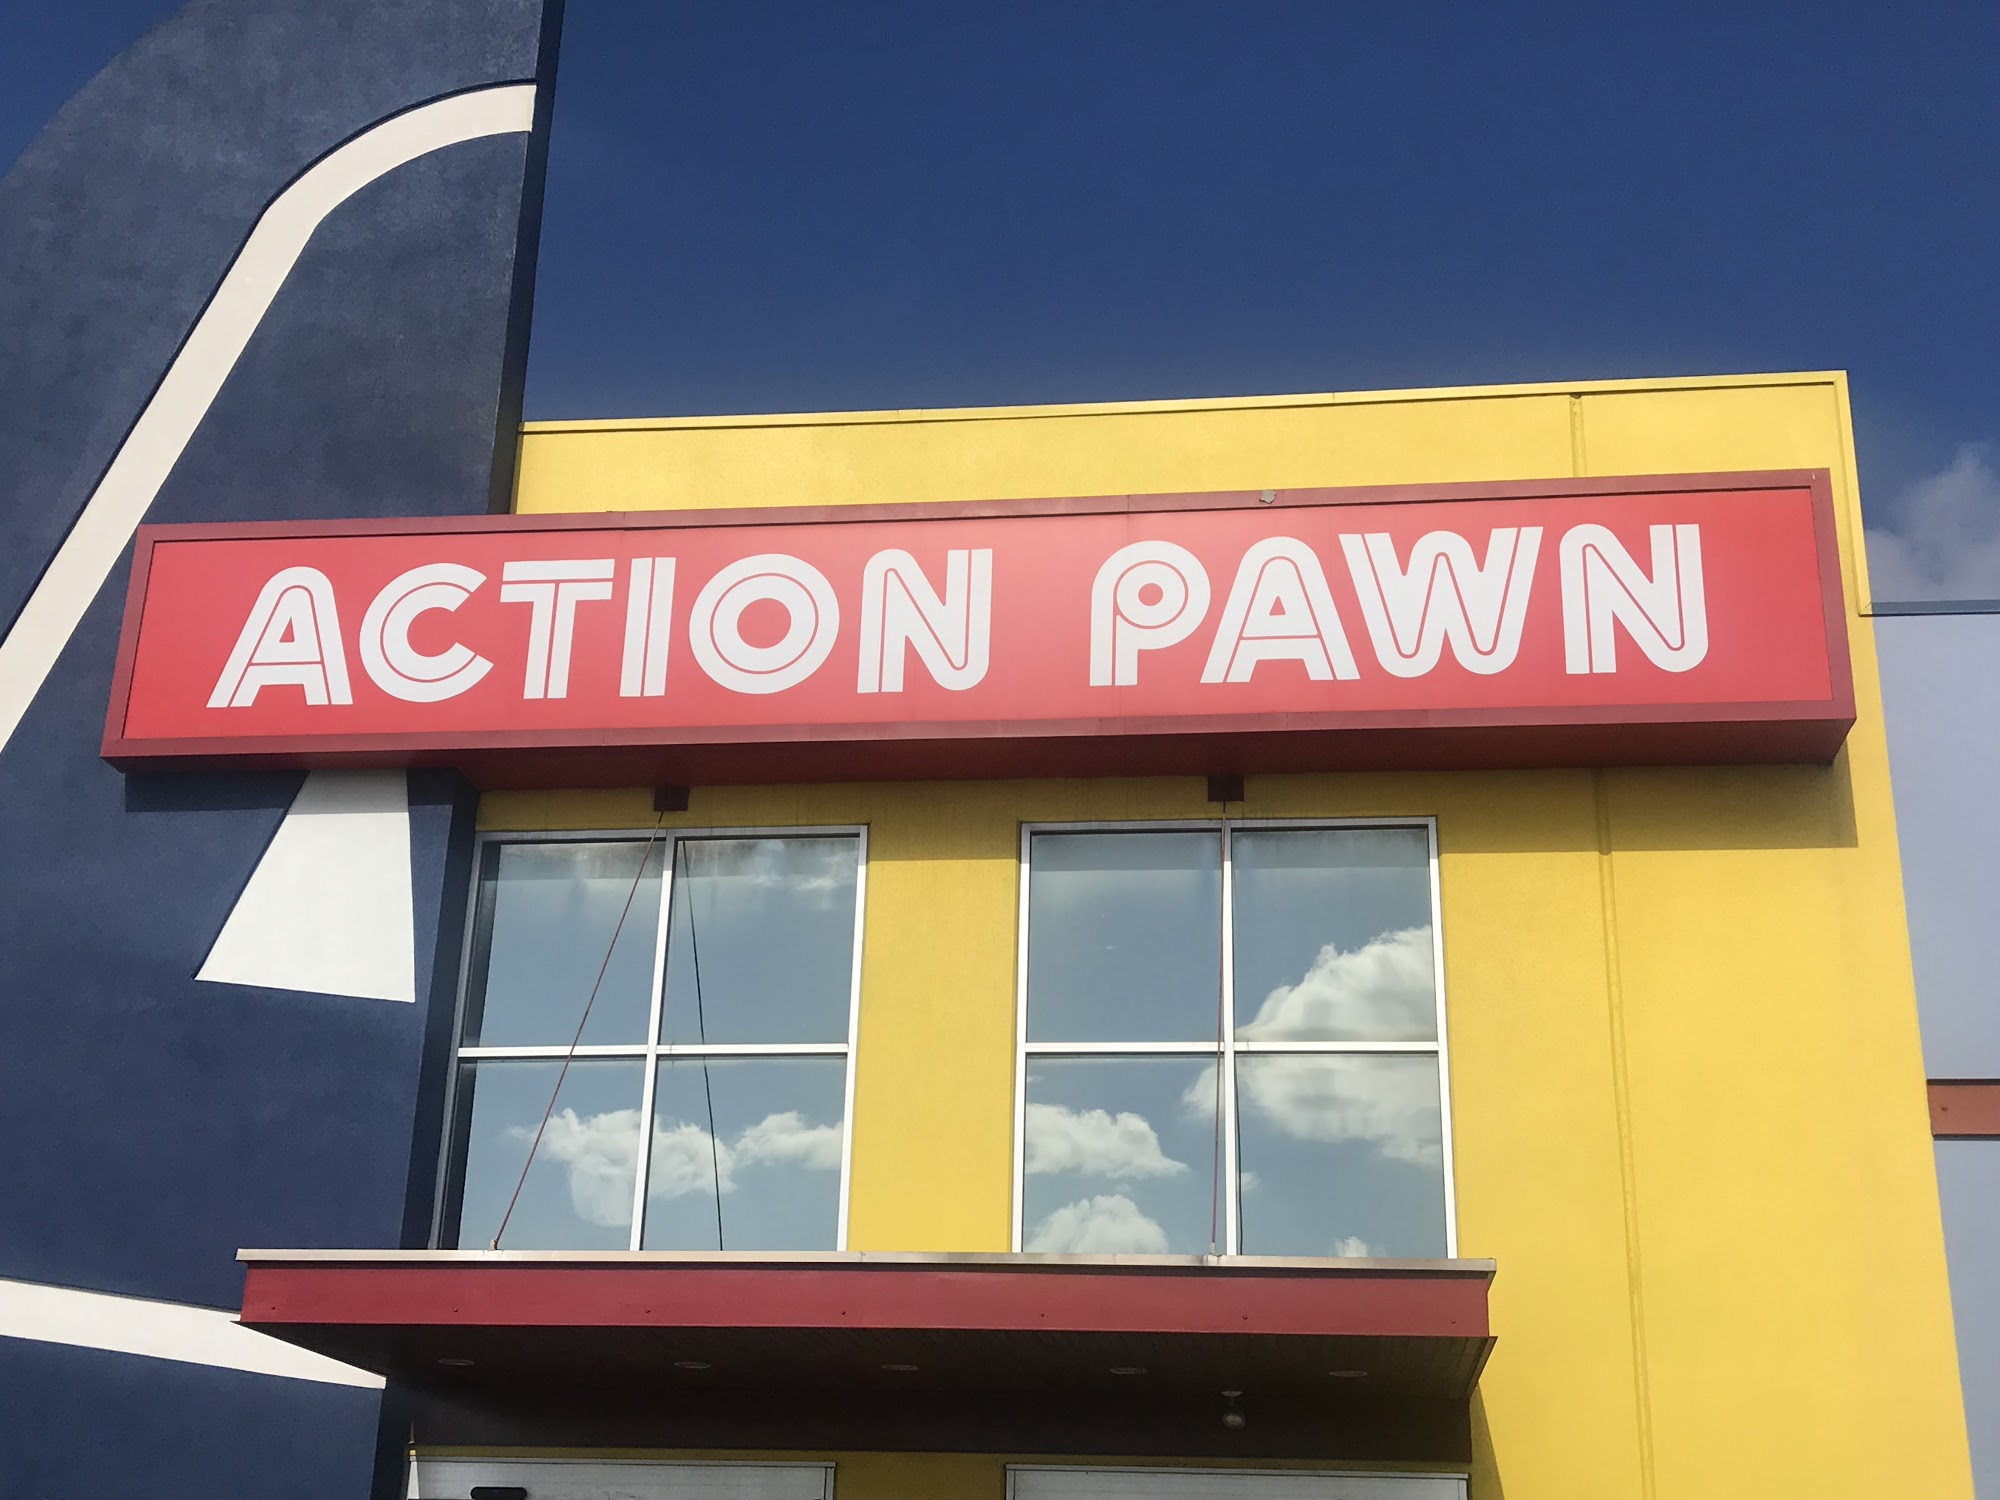 Action Pawn #1